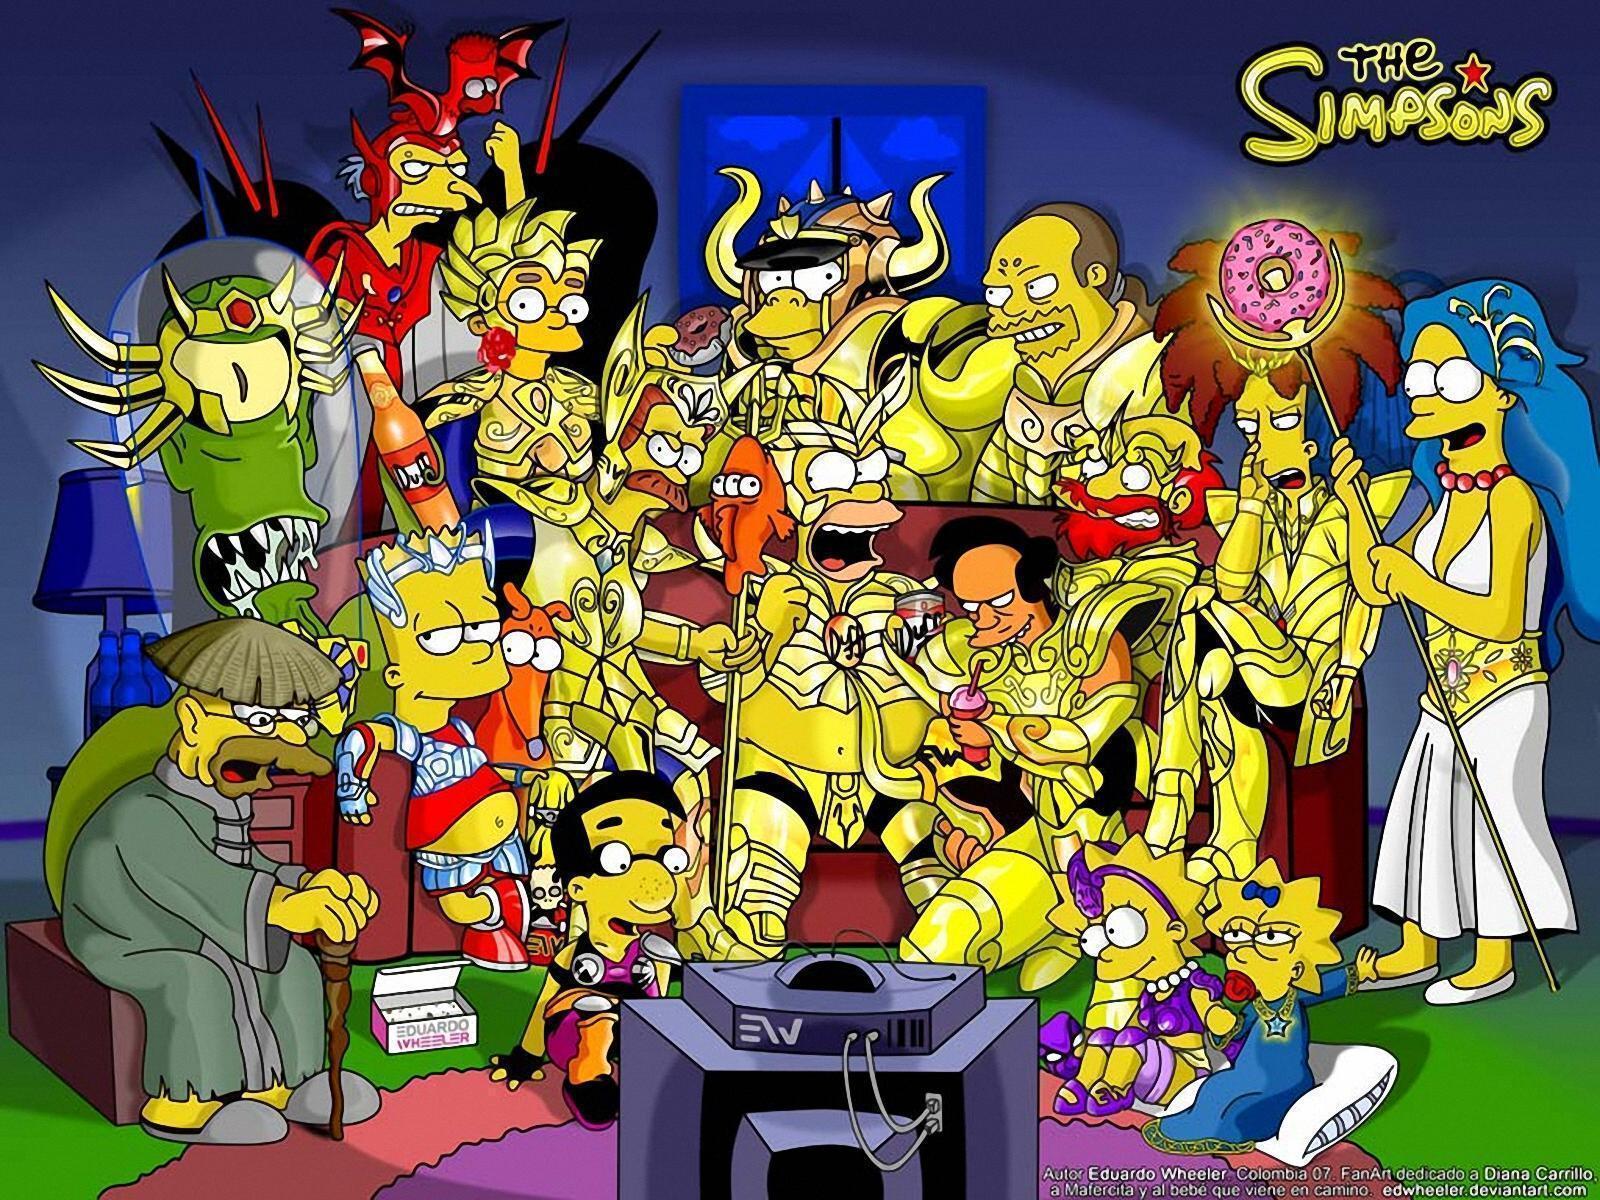 The Simpsons Theme Song. Movie Theme Songs & TV Soundtracks